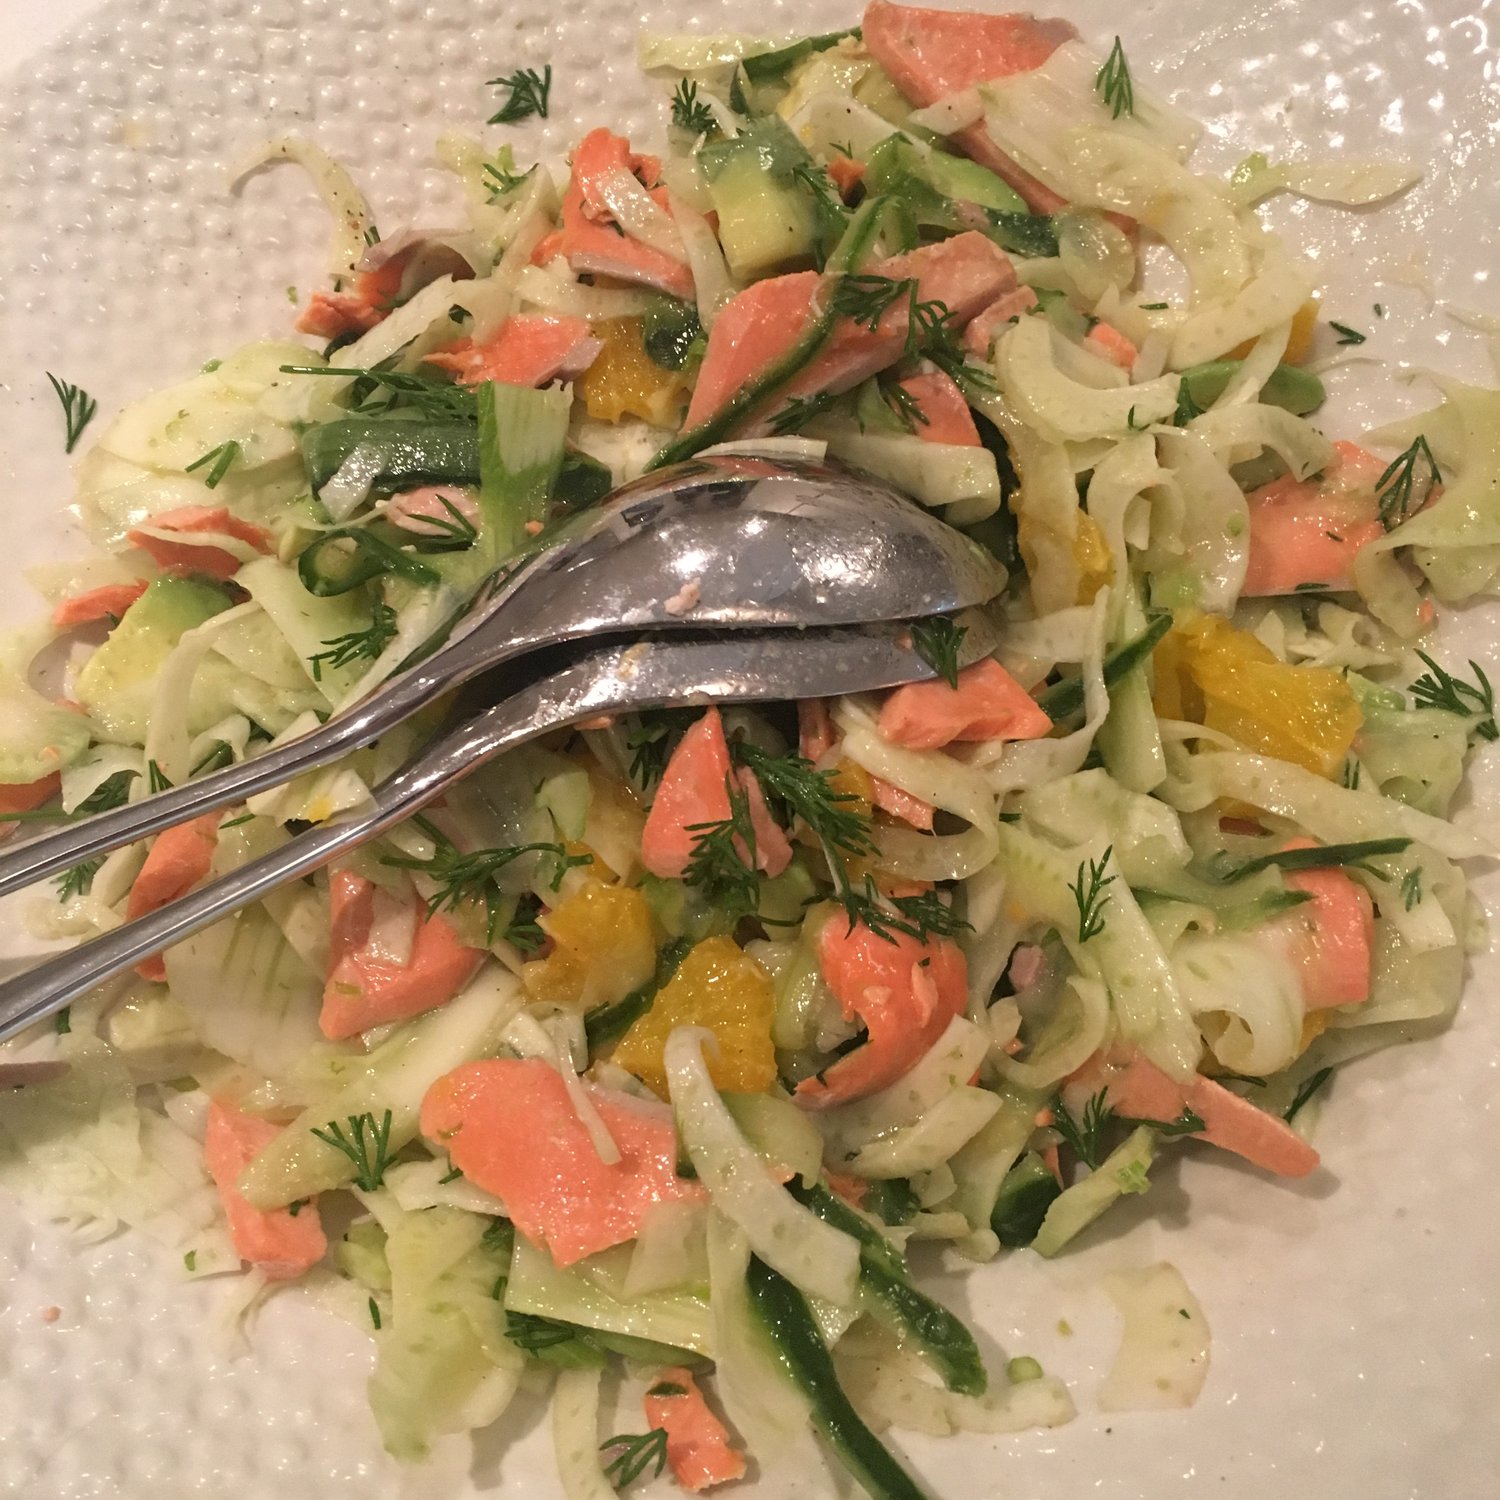 A light and refreshing summer salad: Fennel & poached salmon